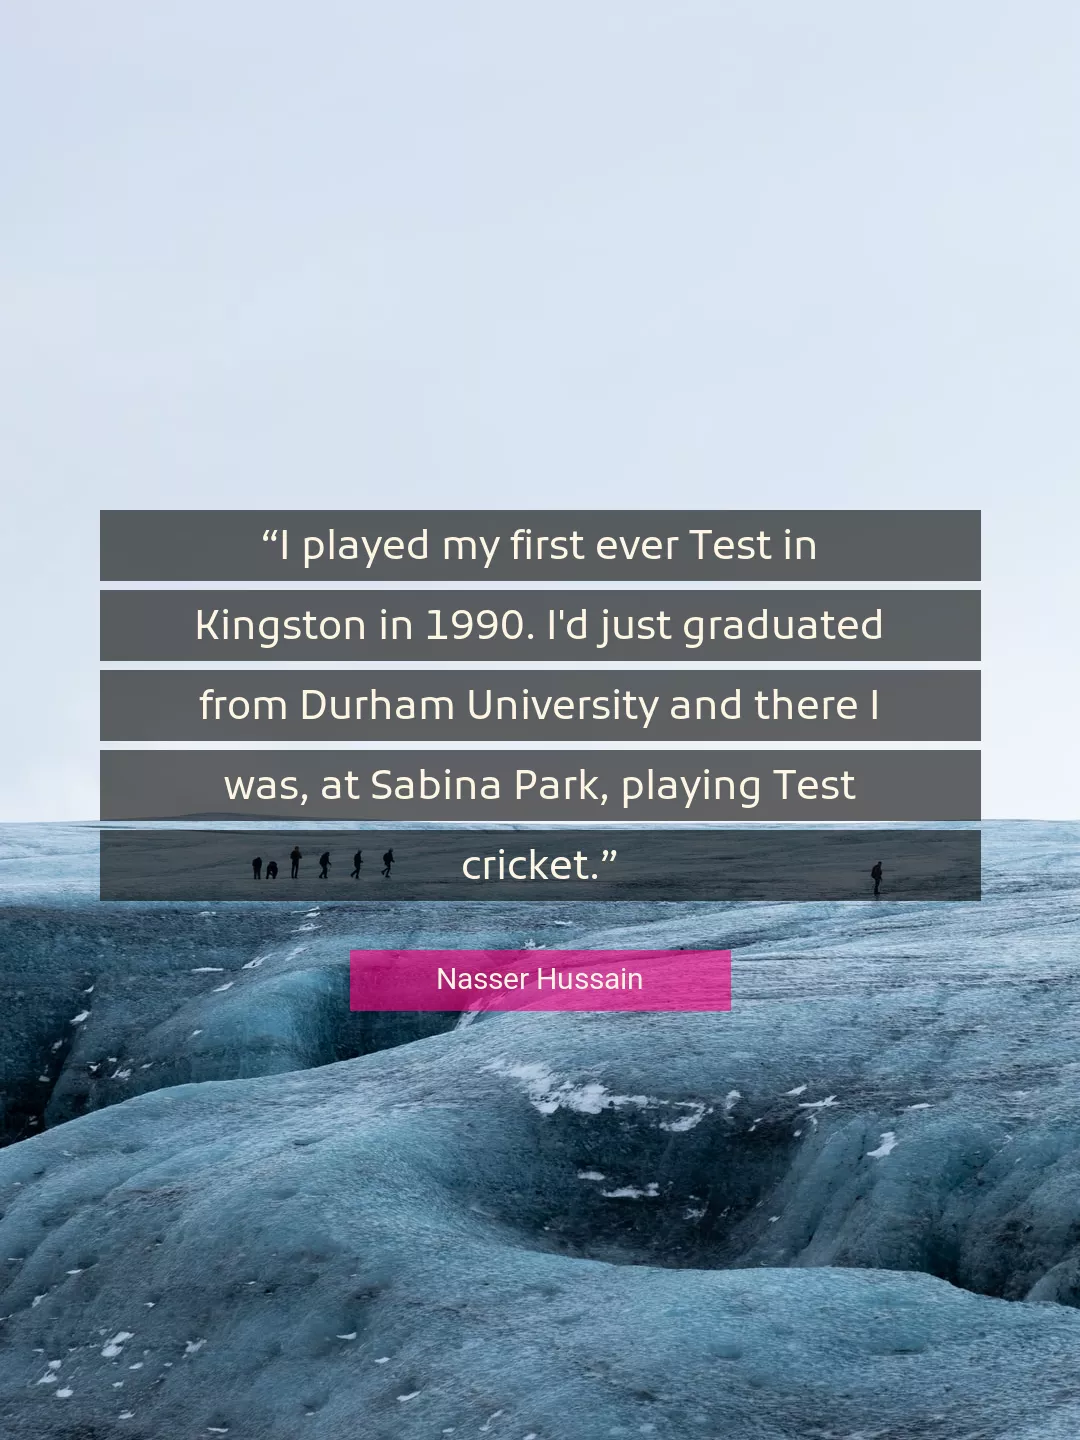 Quote About Cricket By Nasser Hussain